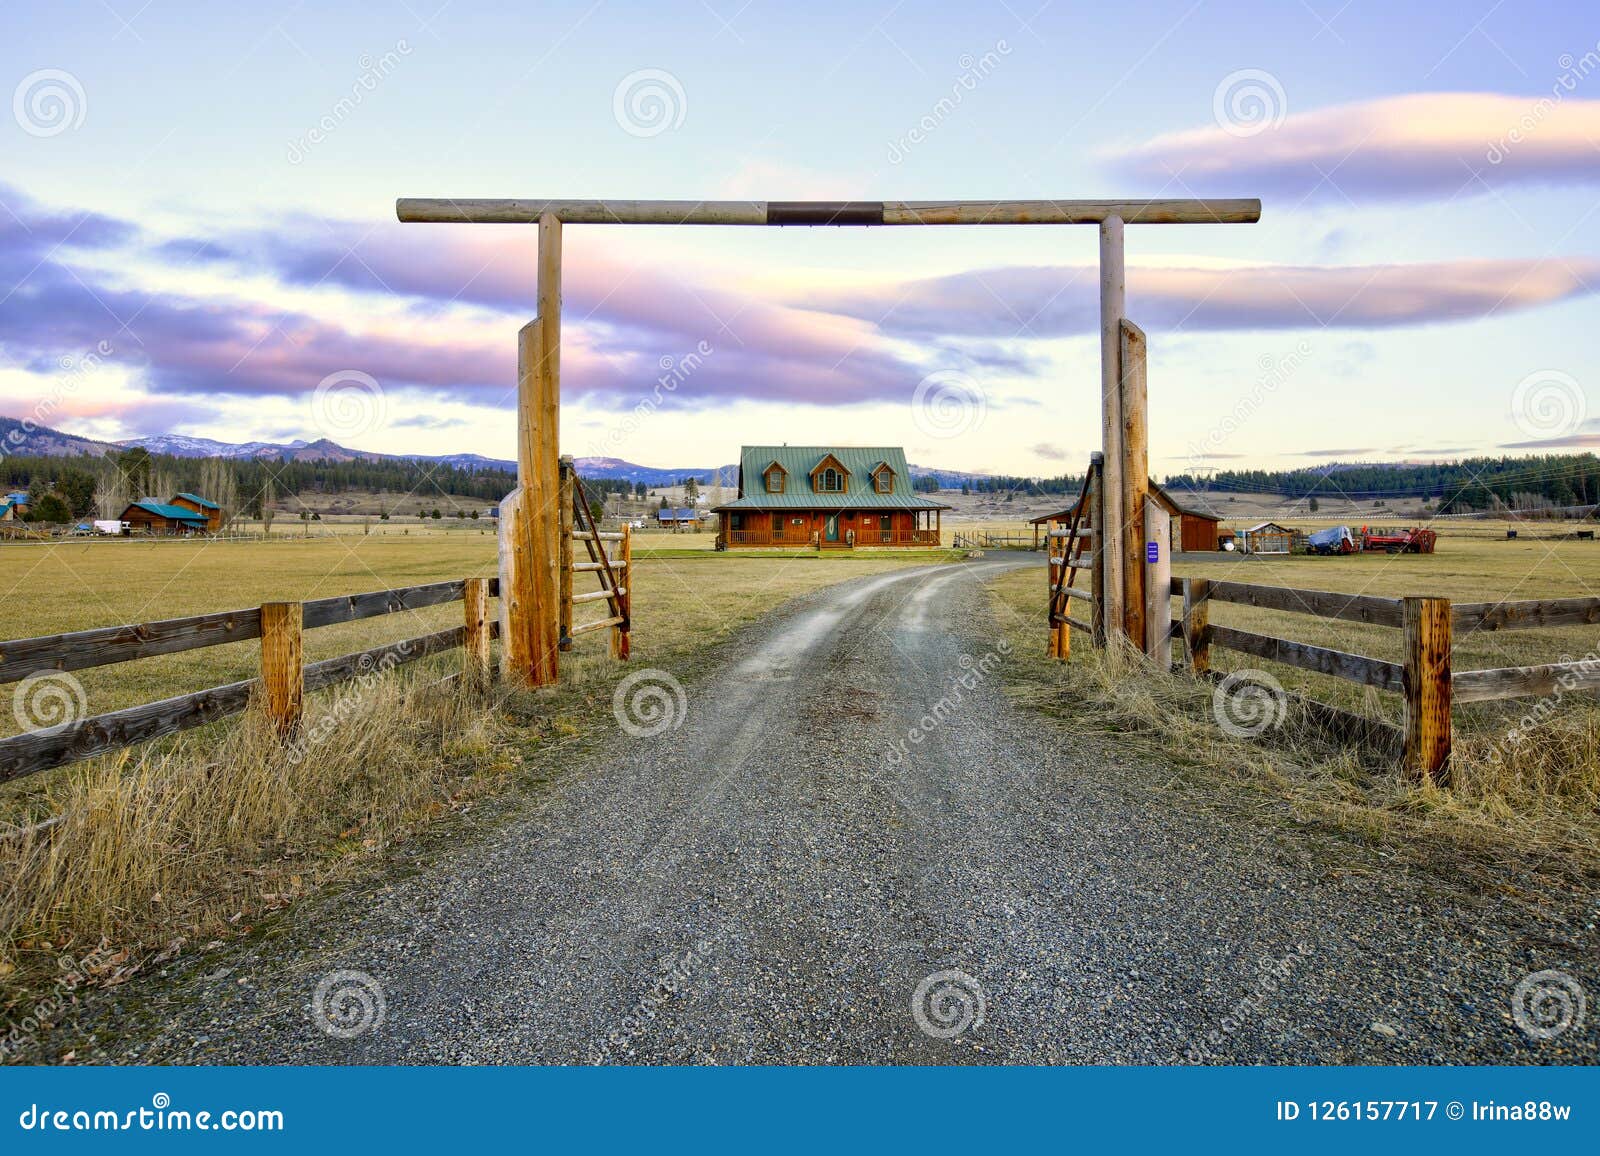 entry gate to a nice wooden ranch home with beautiful landscape.